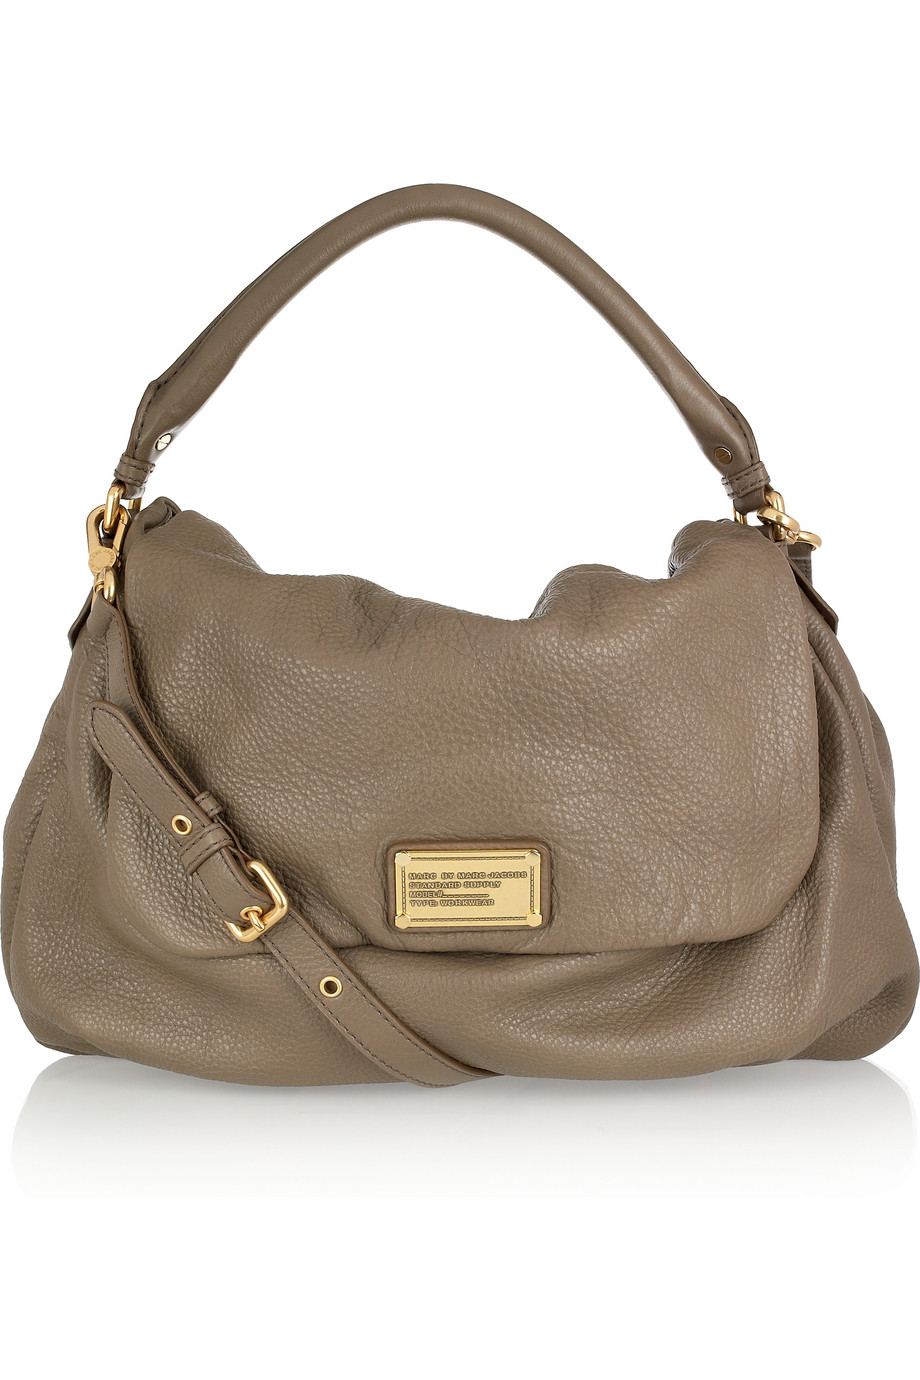 Marc By Marc Jacobs Ukita Textured-leather Shoulder Bag in Brown (taupe) | Lyst